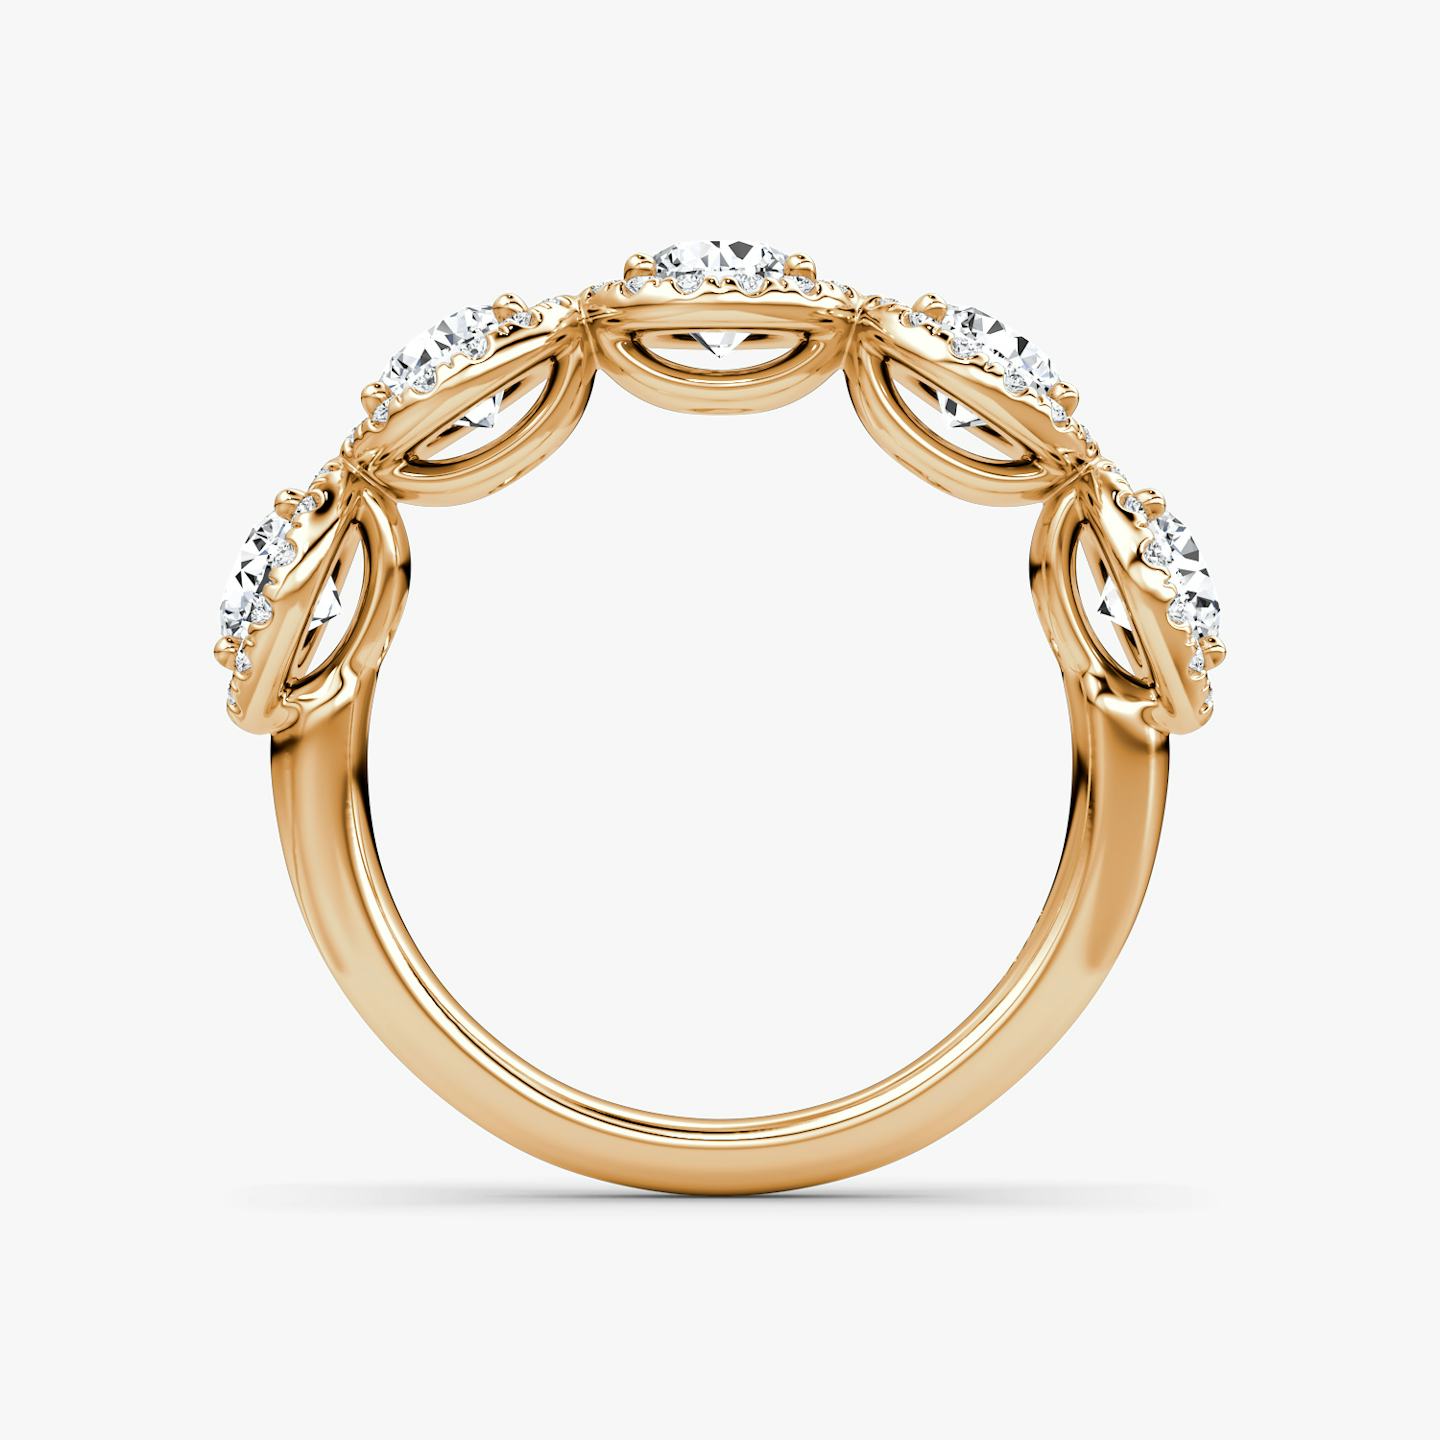 The Five Stone Halo Band | Round Brilliant | 14k | 14k Rose Gold